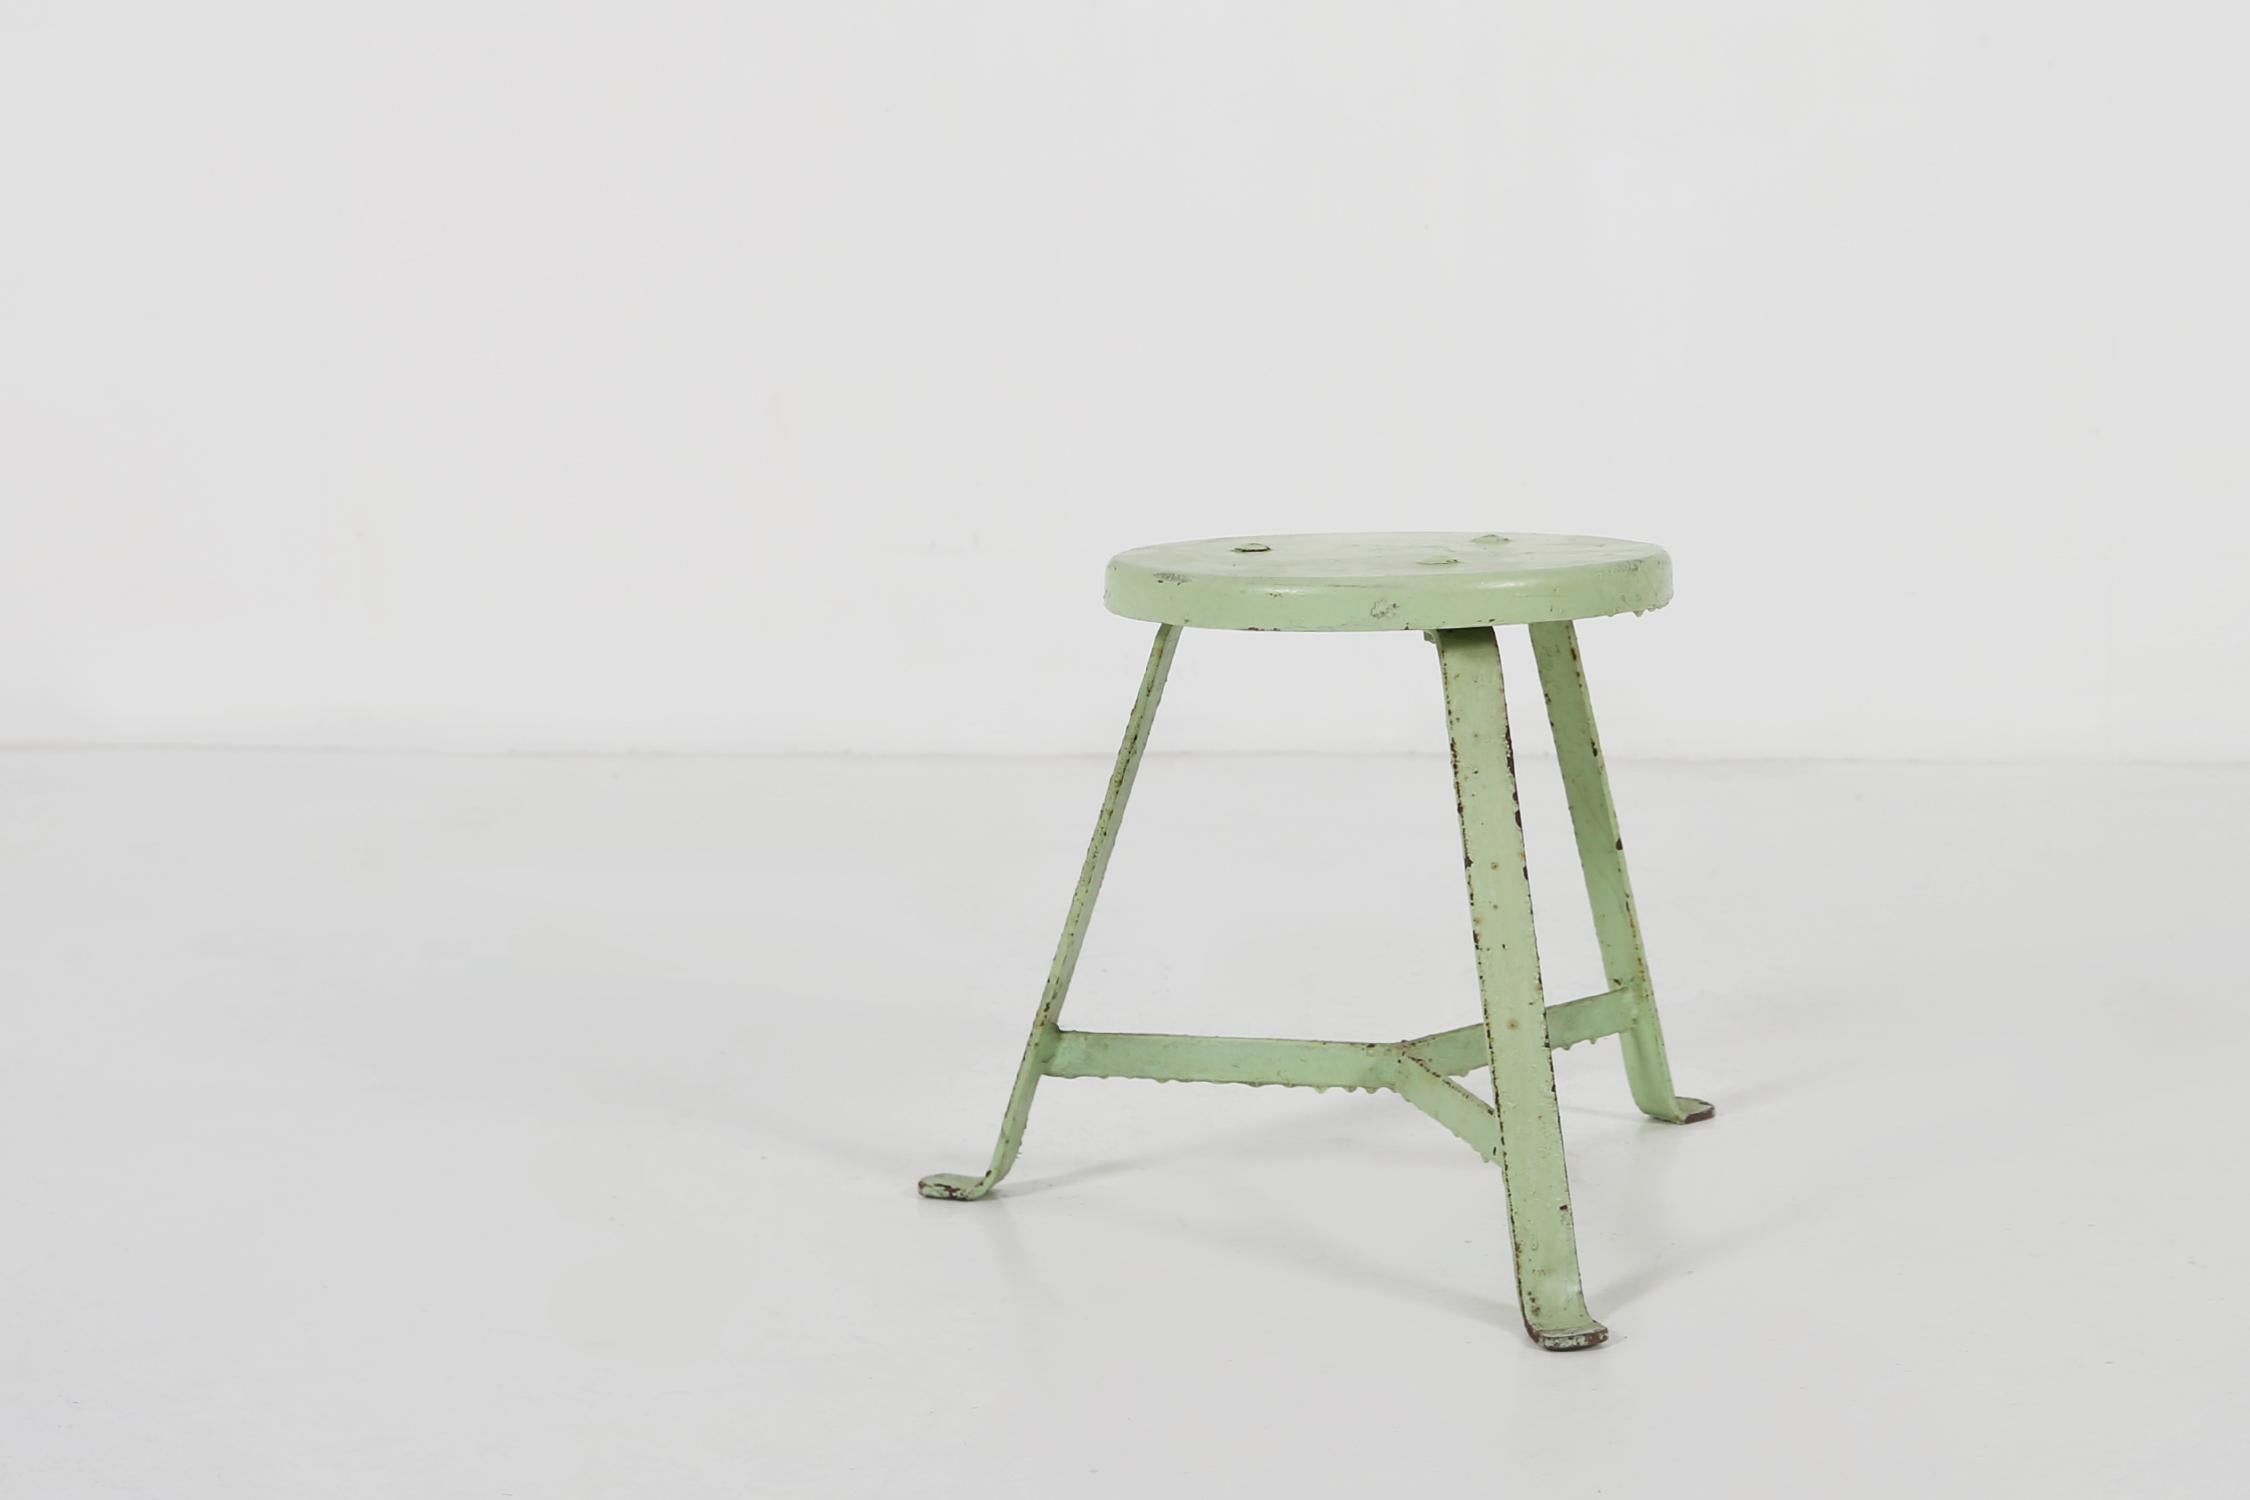 Industrial stool painted in green with a steel base and wooden top.
Whit some great patina.

Measures: Diameter seating: 25 cm
Diameter base: 39 cm.